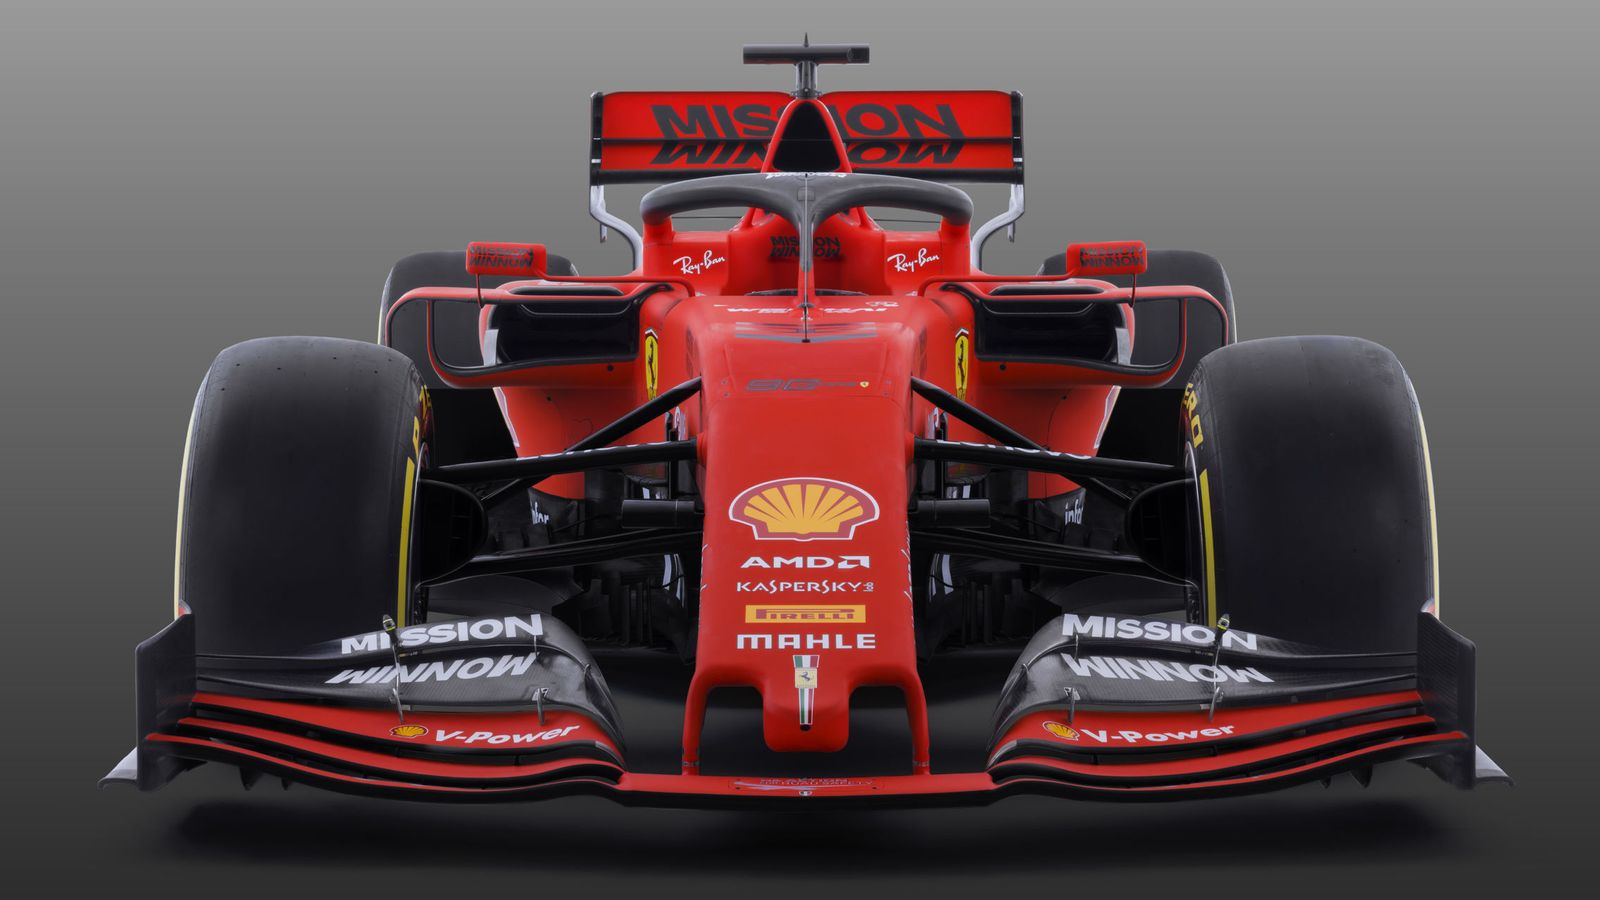 Ferrari in red and black as they launch new 2019 Formula 1 car.